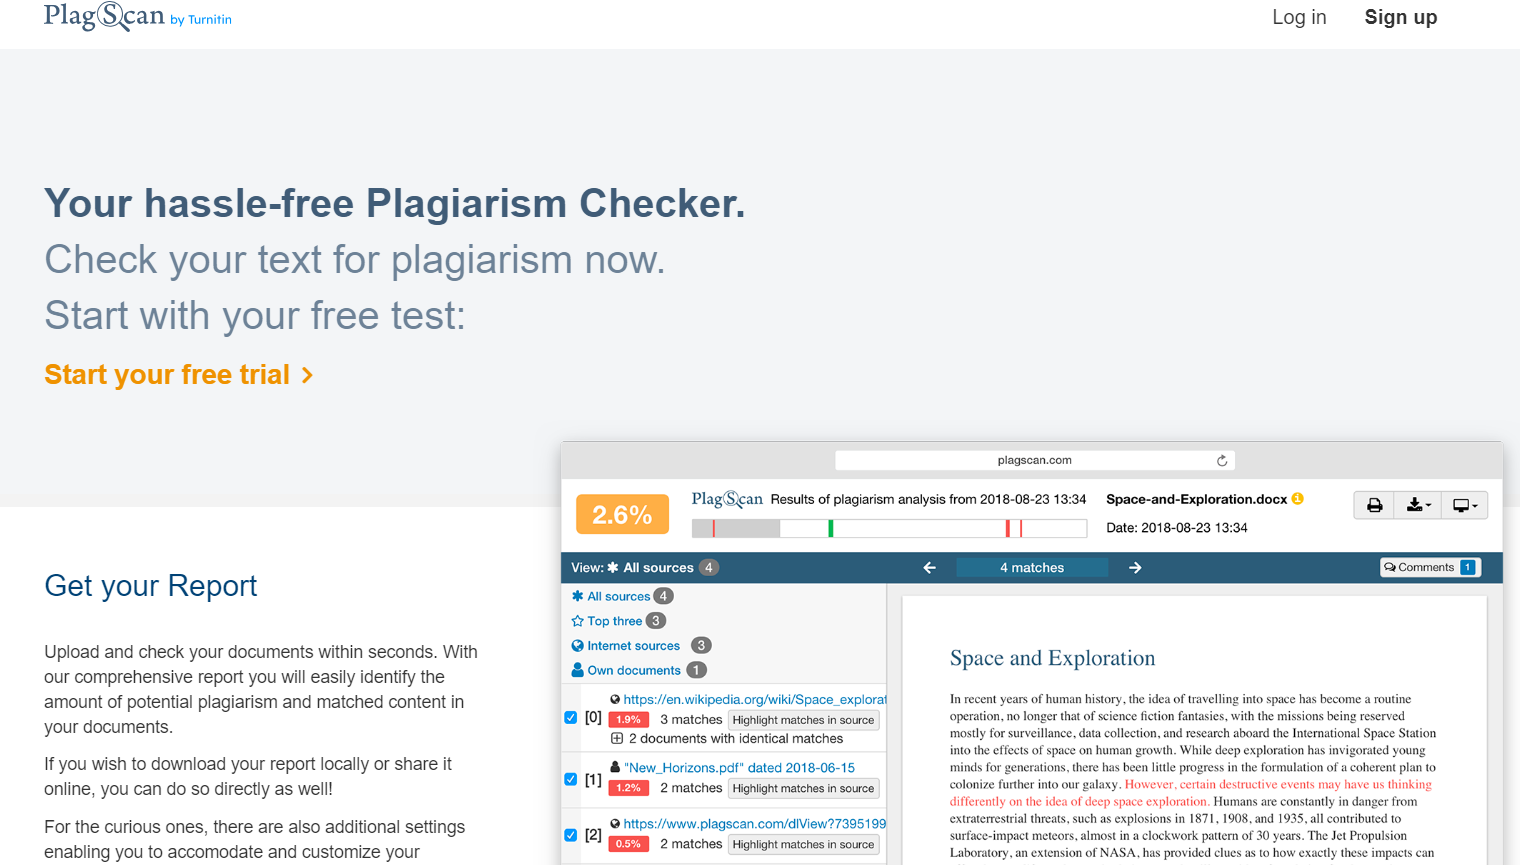 PlagScan Plagiarism Checker Overview